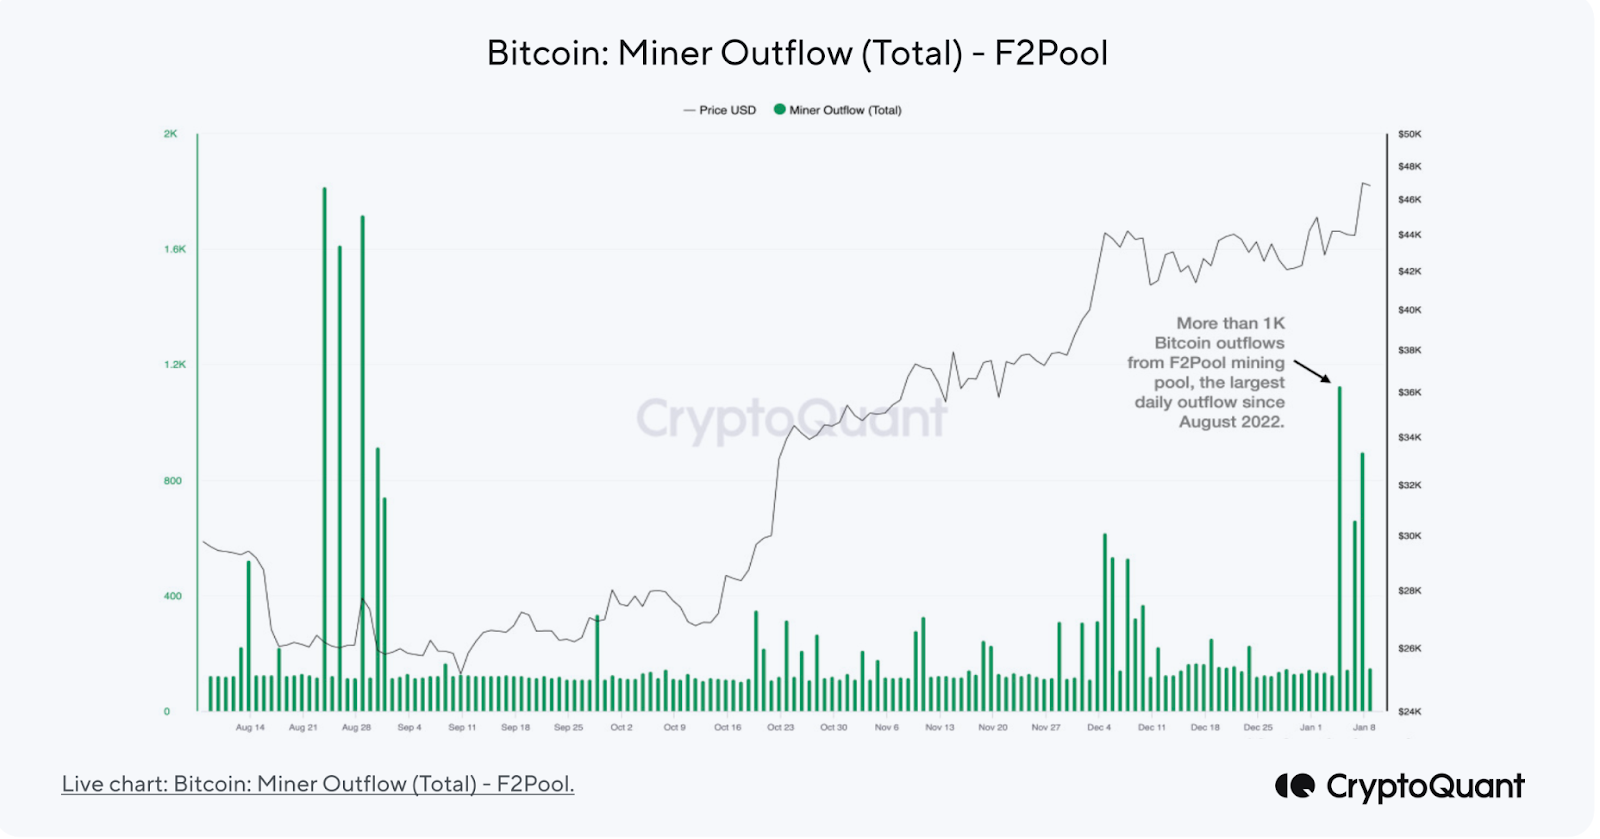 Bitcoin Miner Outflows Hit Six-Year Highs Ahead of Halving, Sparking Mixed Signals